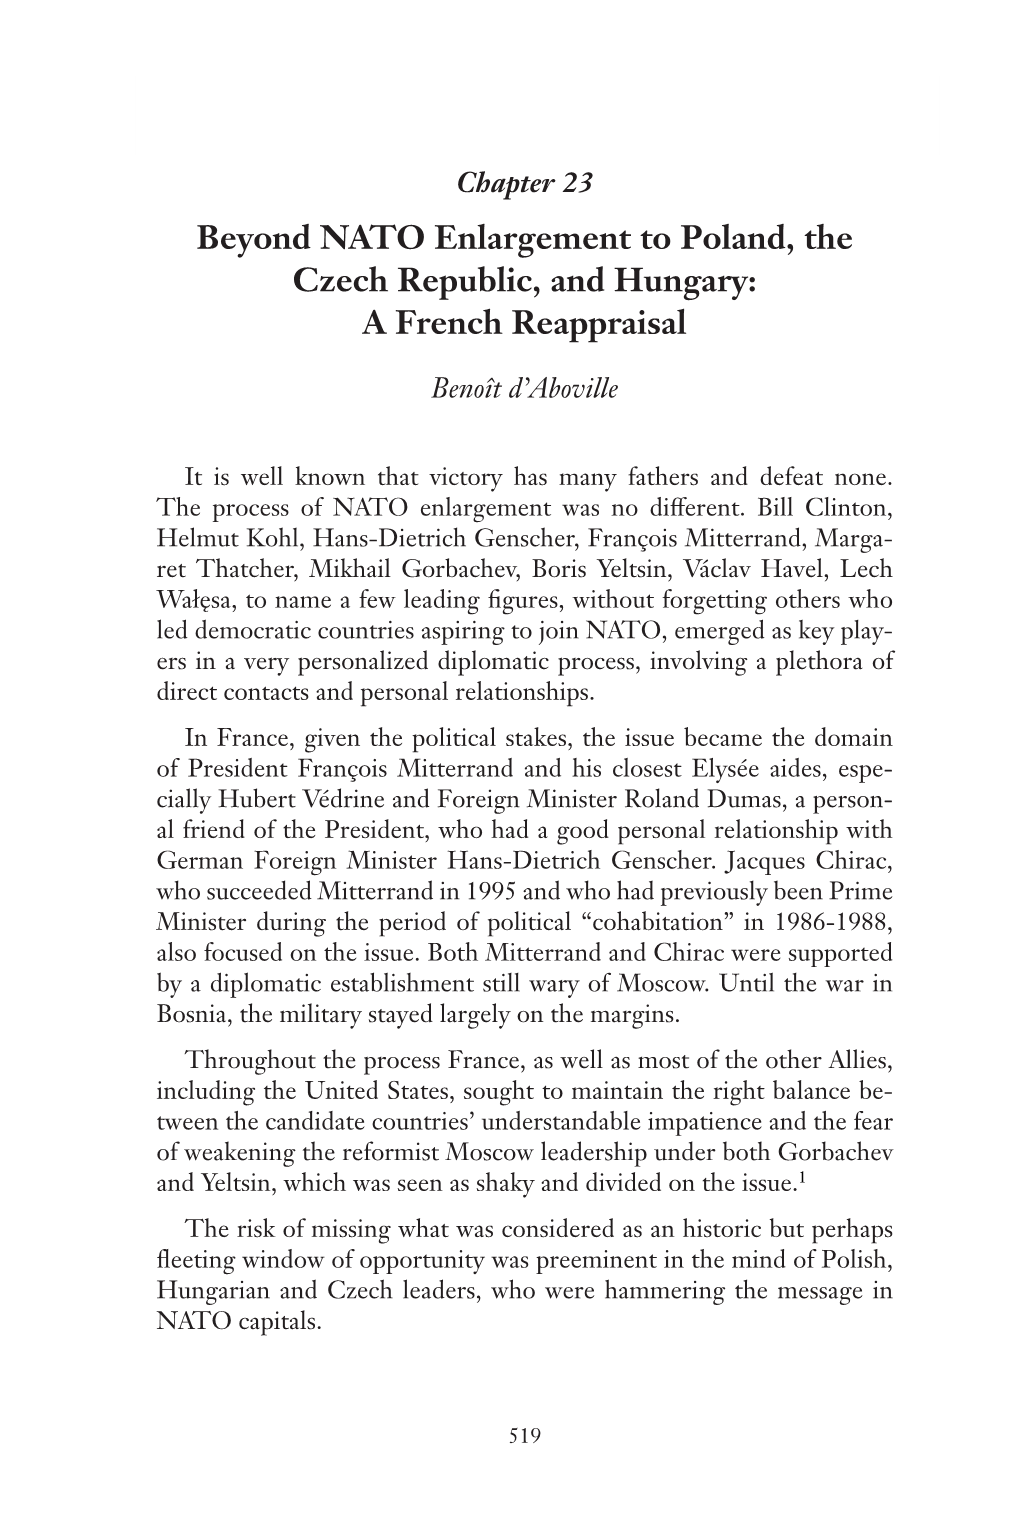 Beyond NATO Enlargement to Poland, the Czech Republic, and Hungary: a French Reappraisal